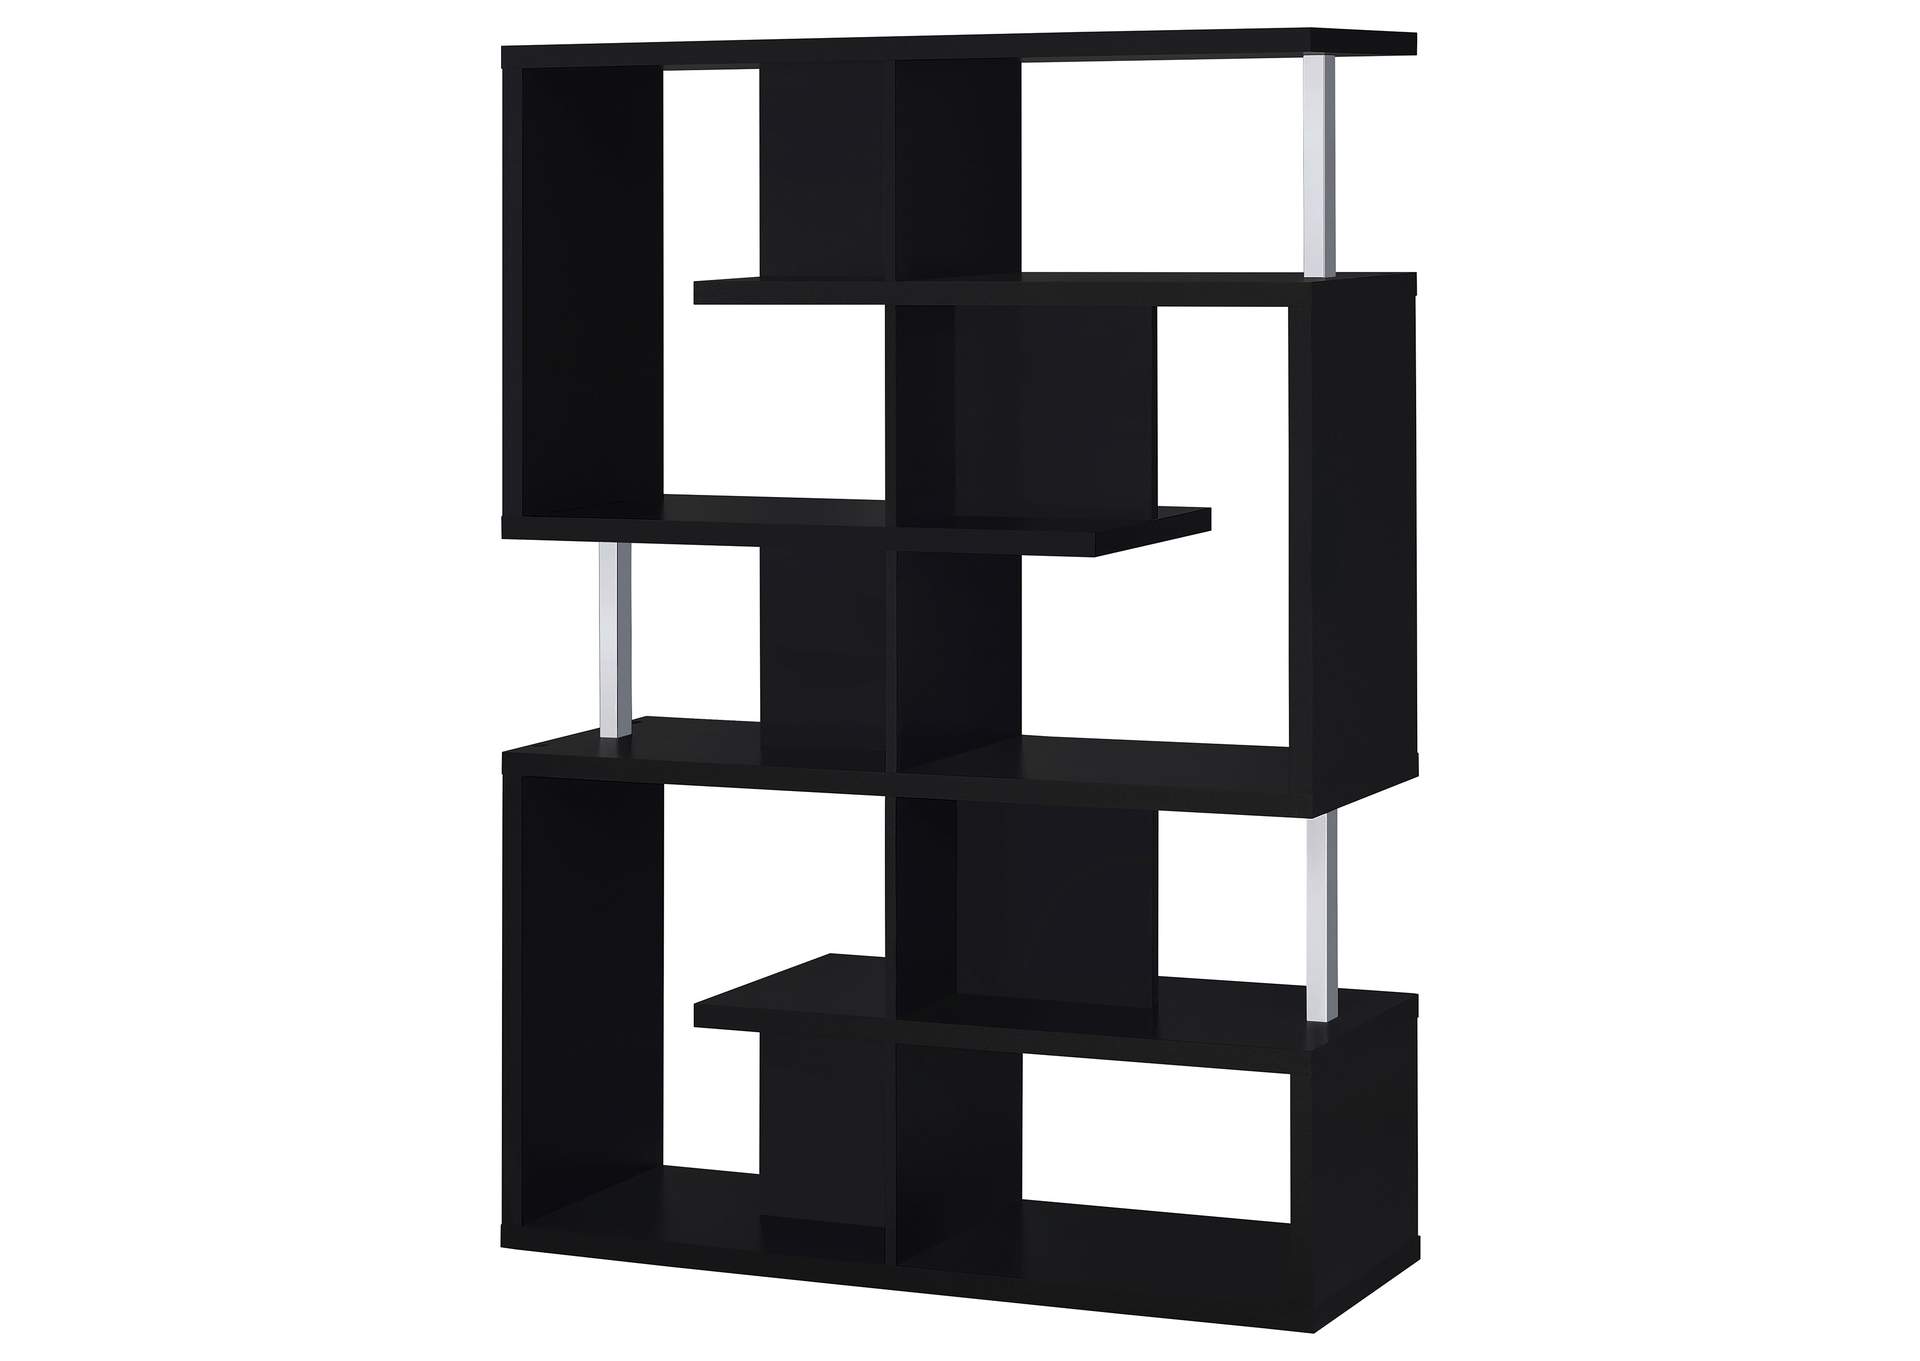 Hoover 5-tier Bookcase Black and Chrome,Coaster Furniture